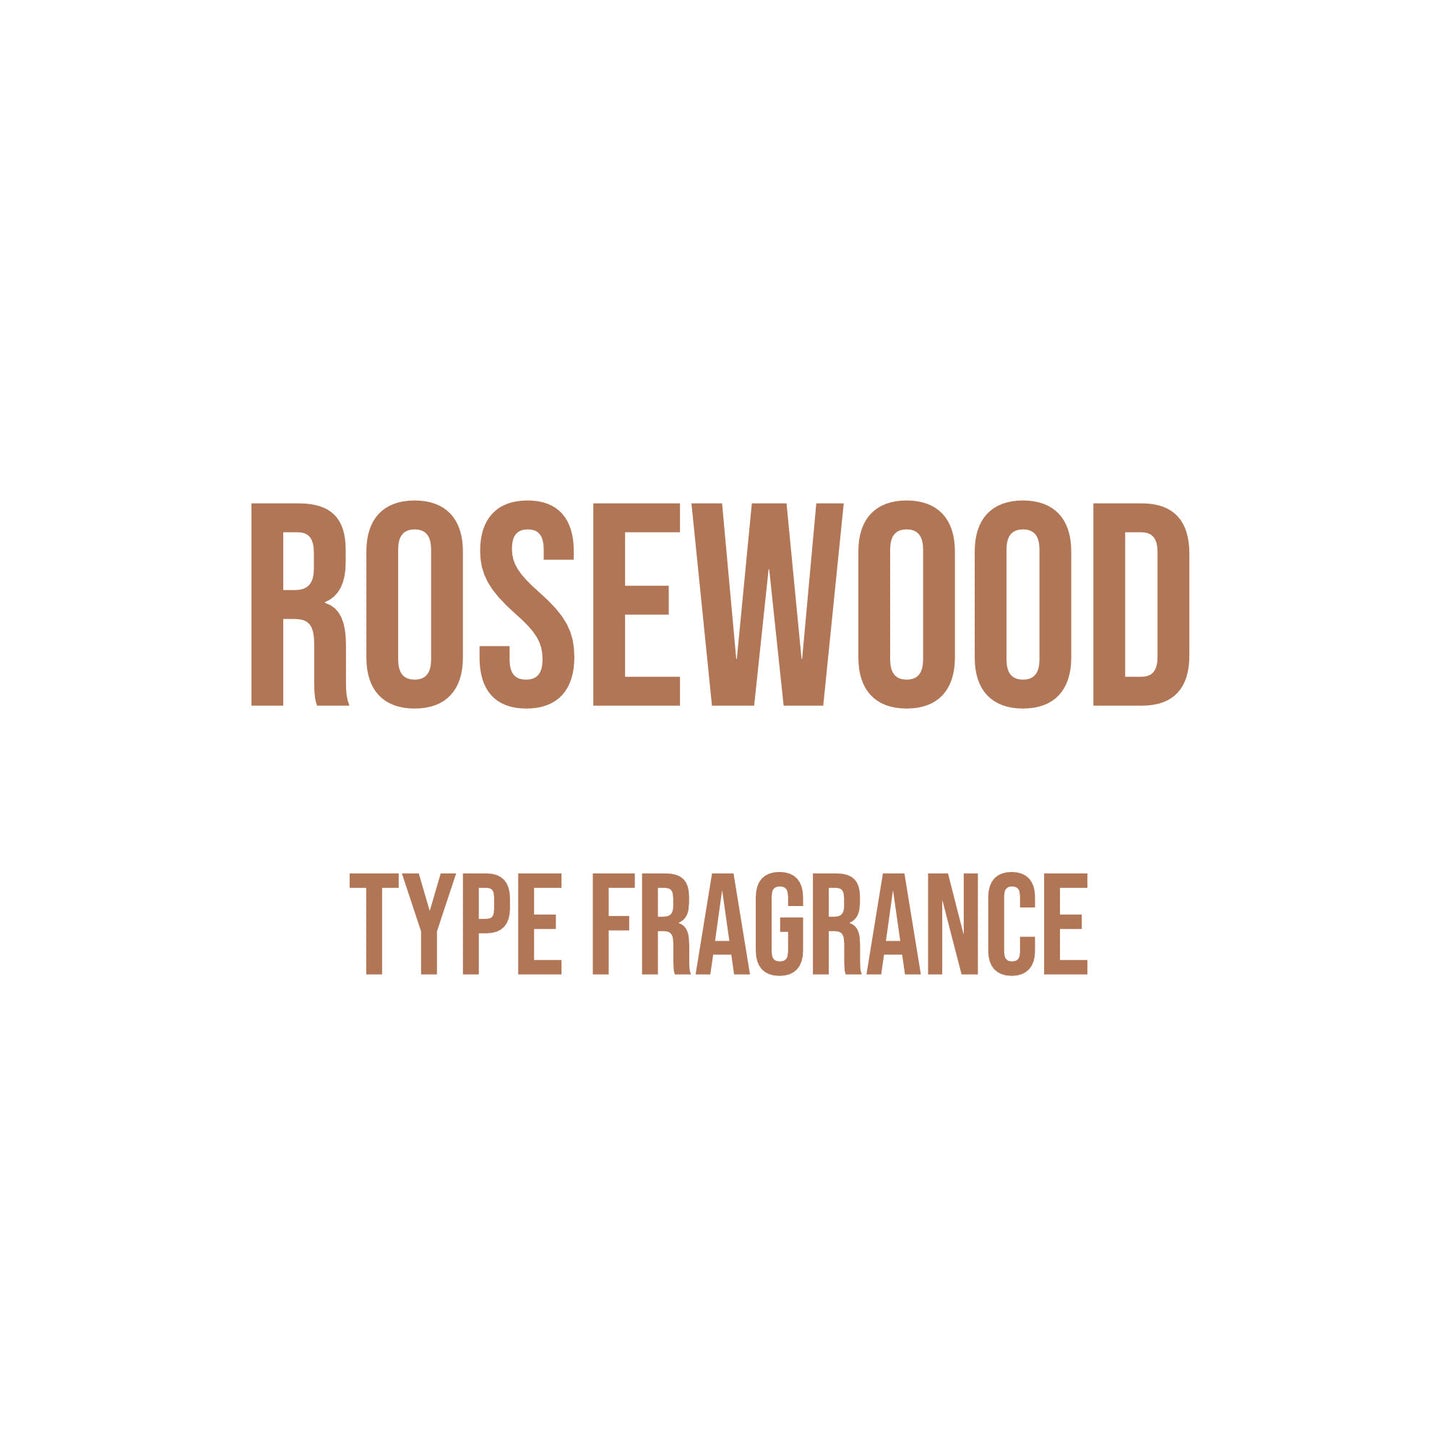 Rosewood Type Fragrance